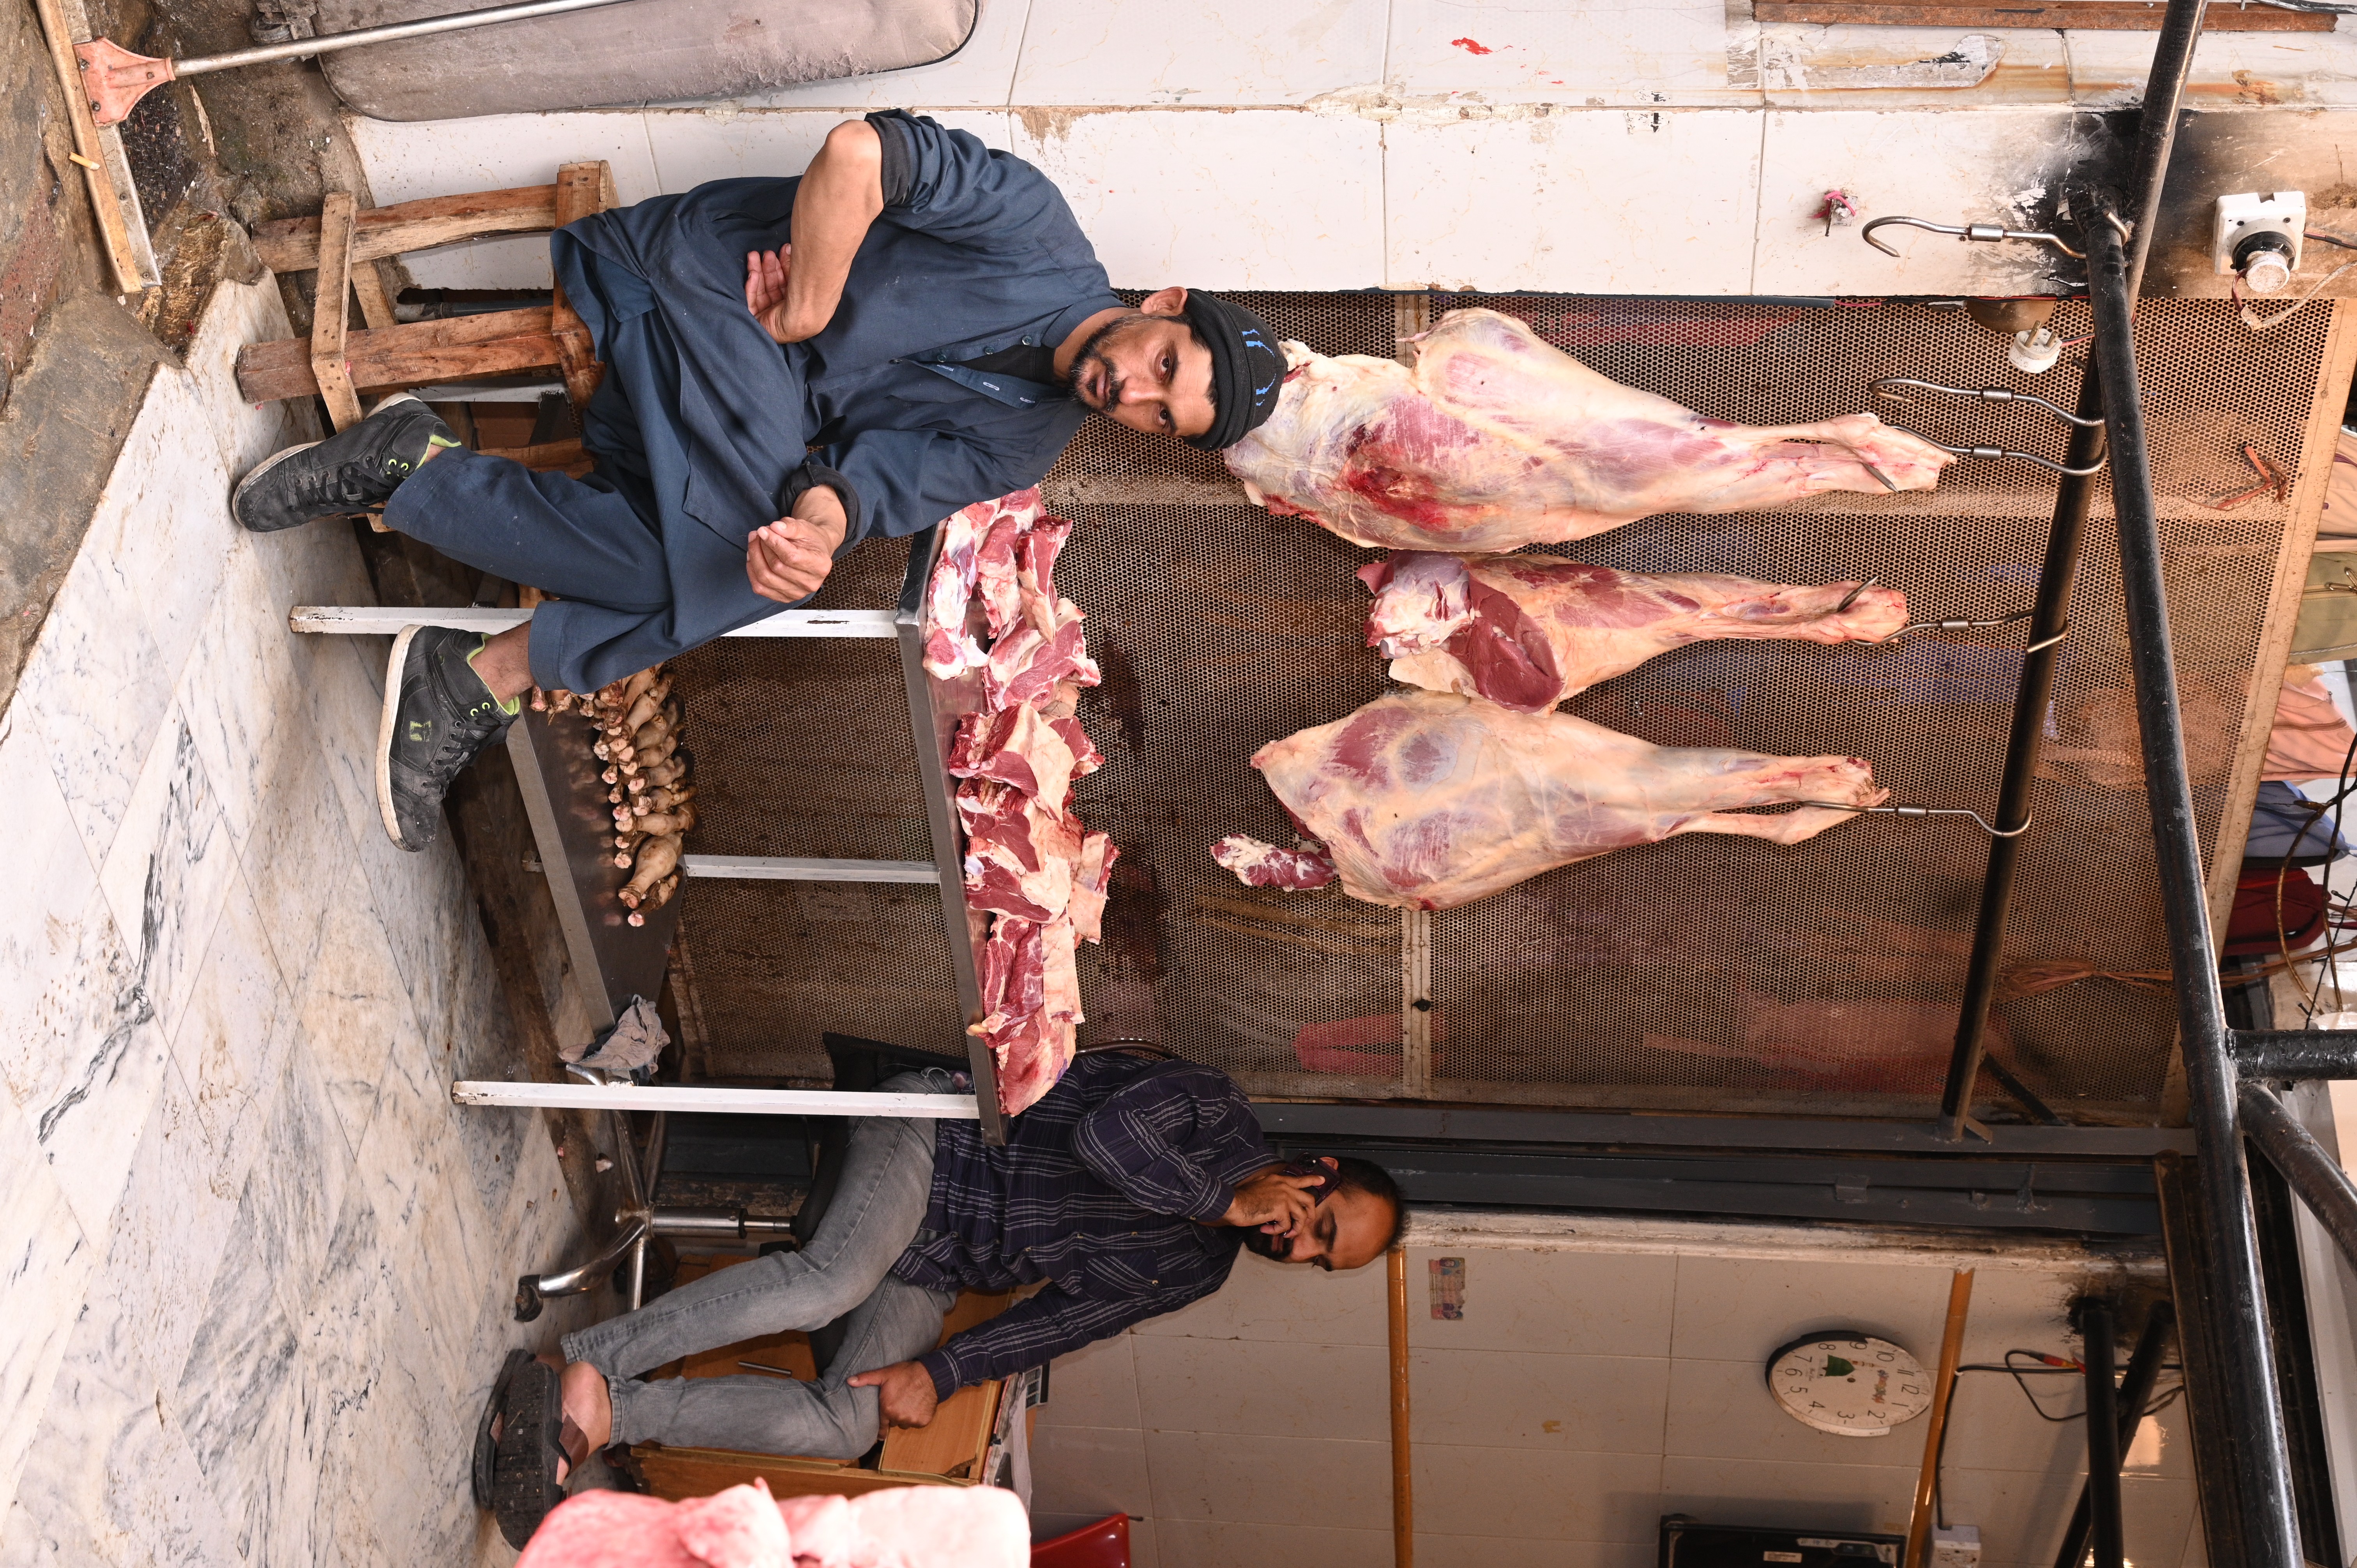 A butcher shop with variety of fresh meat